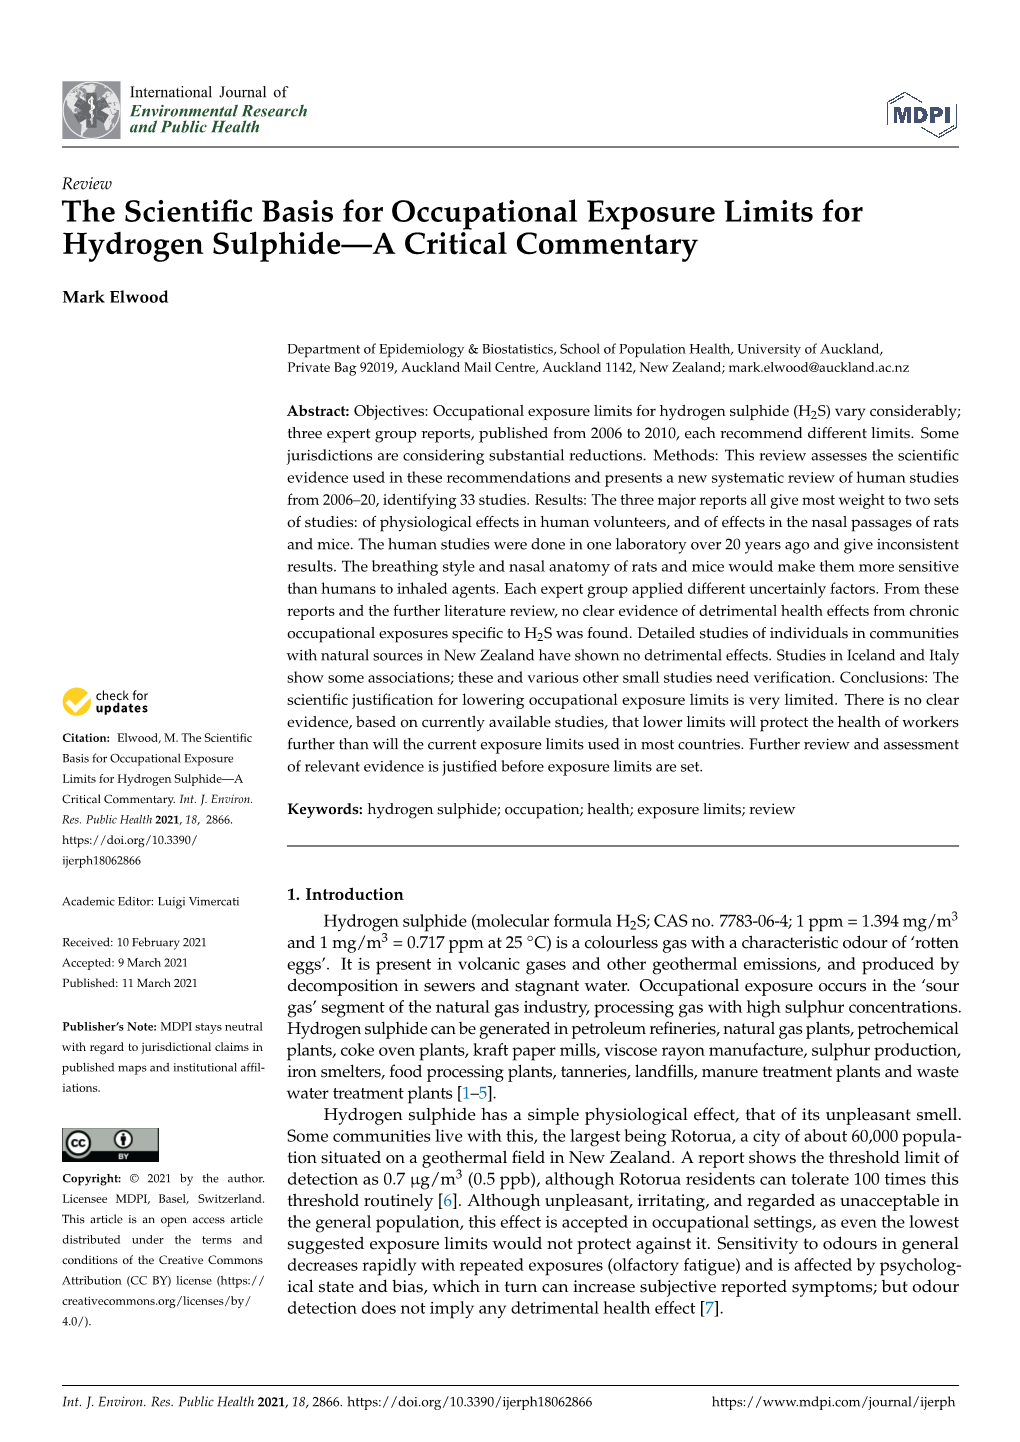 The Scientific Basis for Occupational Exposure Limits for Hydrogen